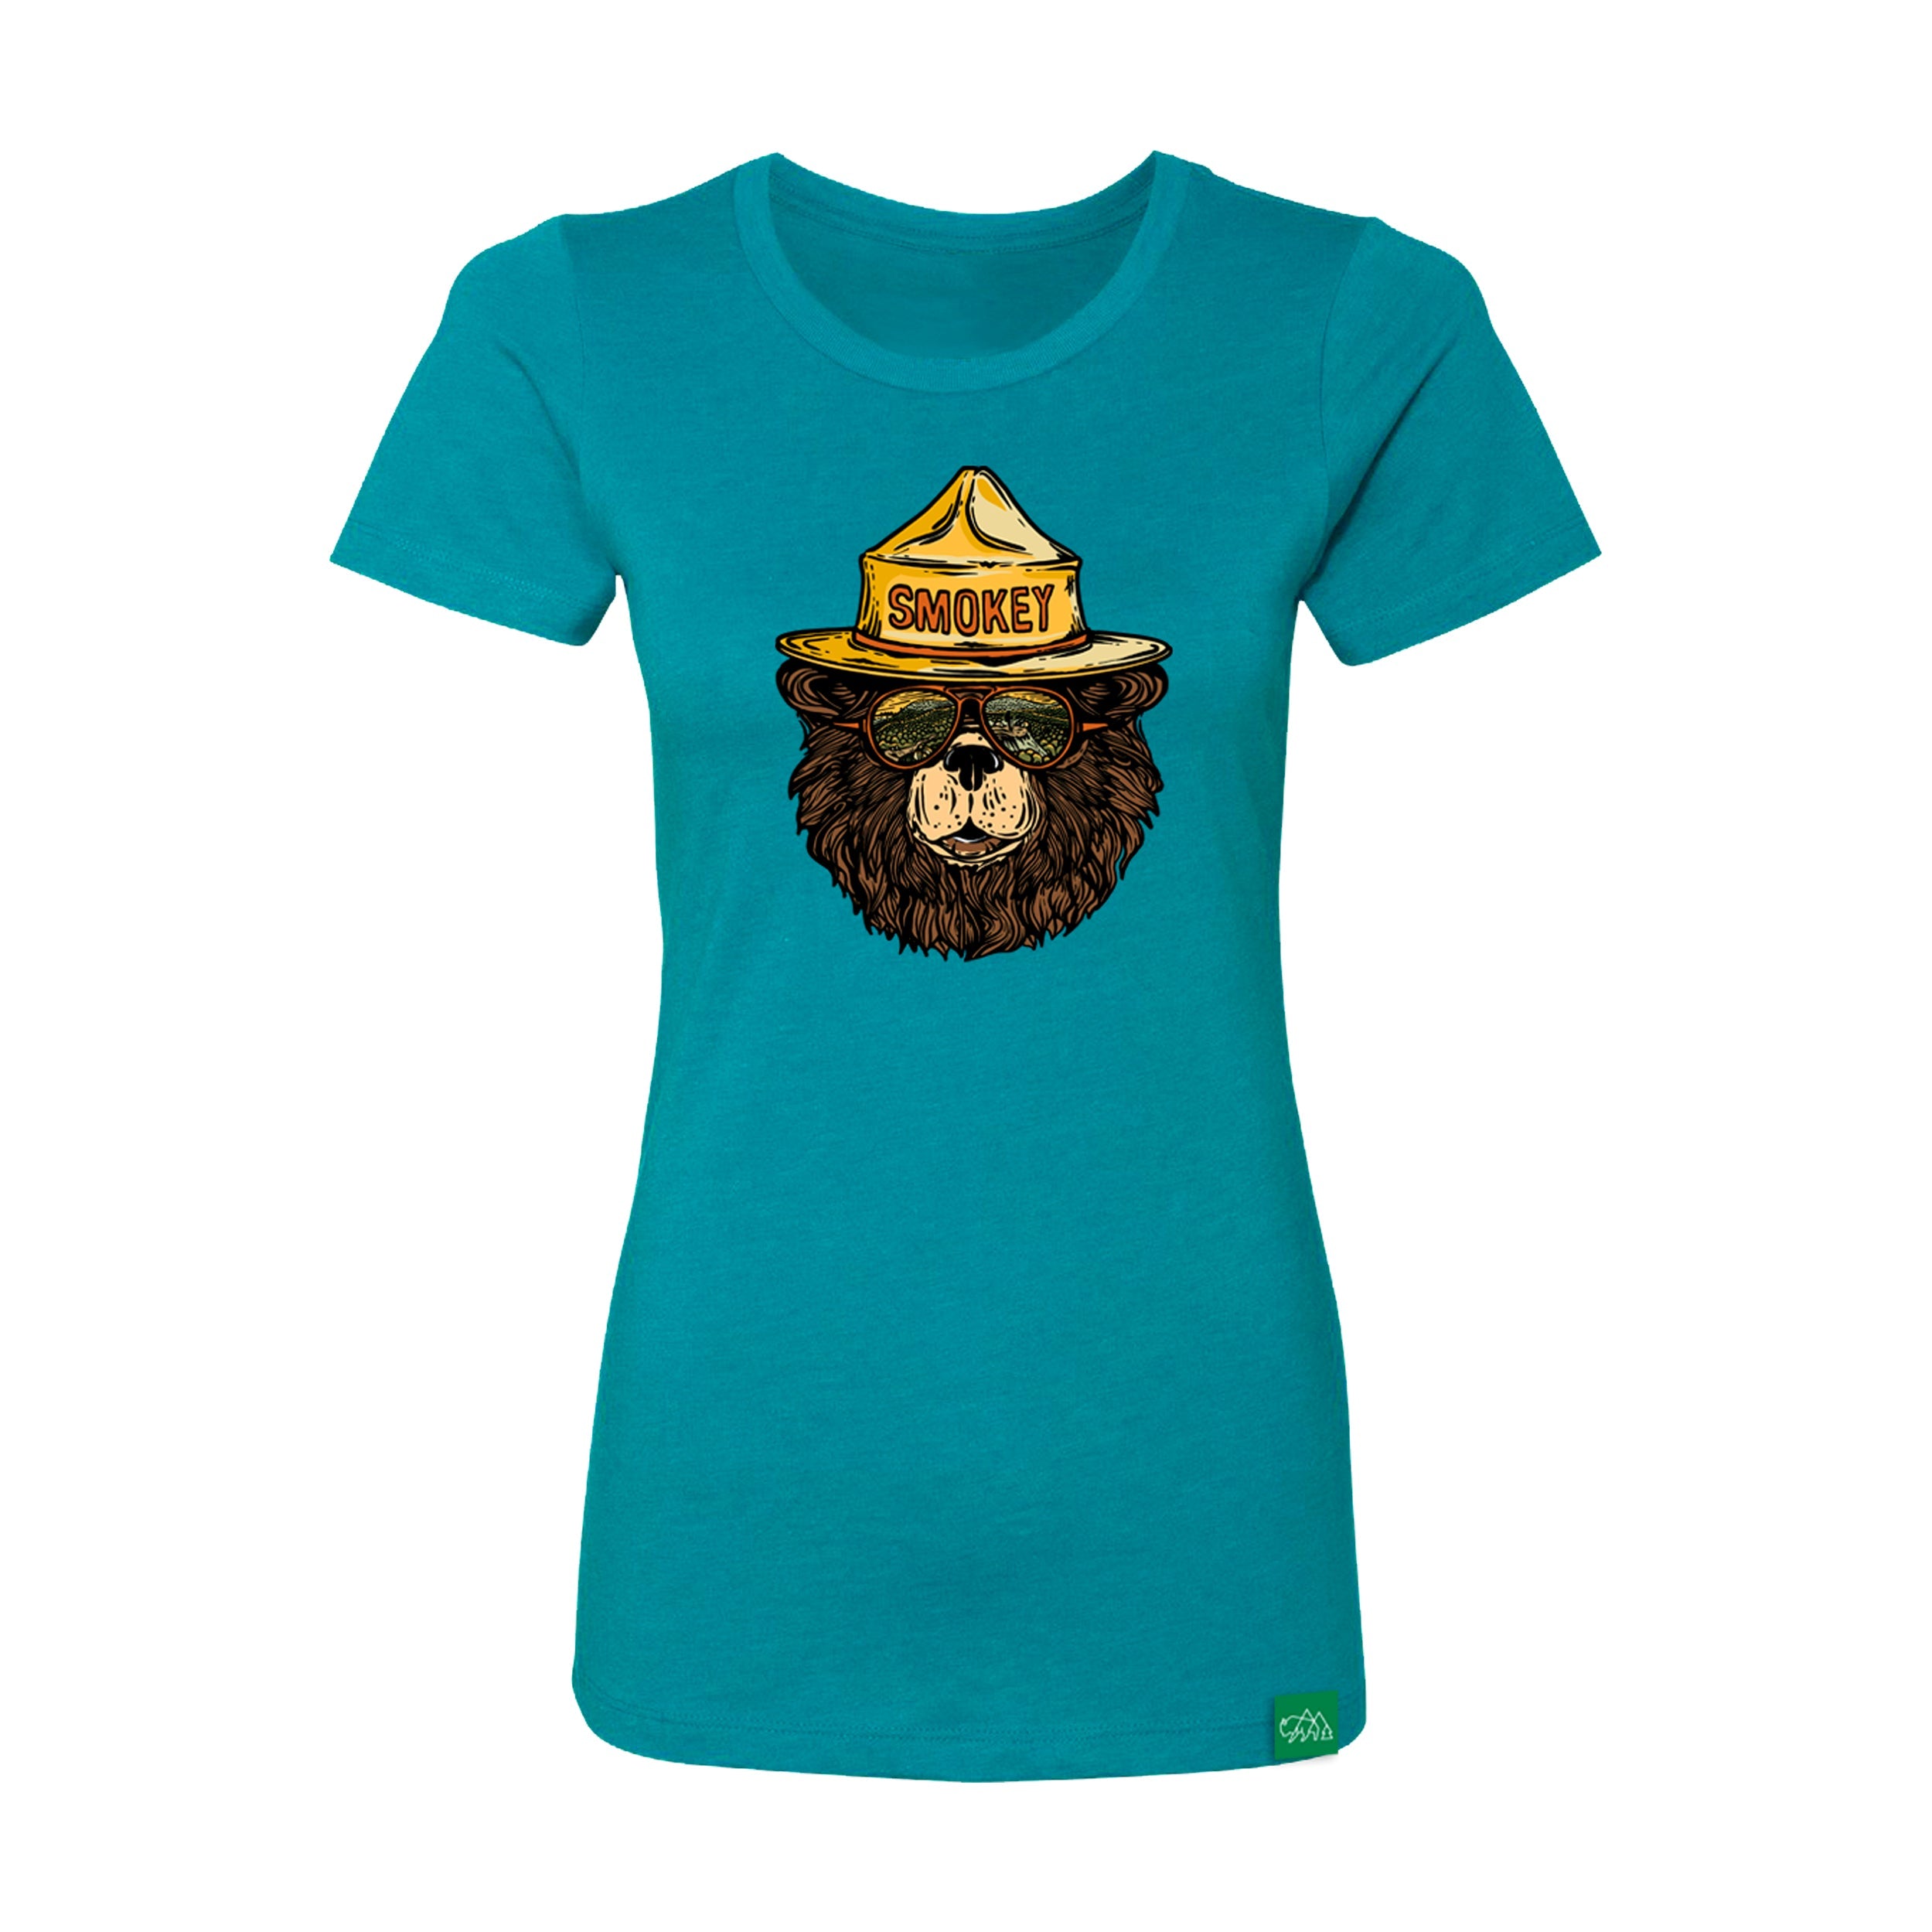 Smokey The Groovy Bear Women's Fitted T-Shirt